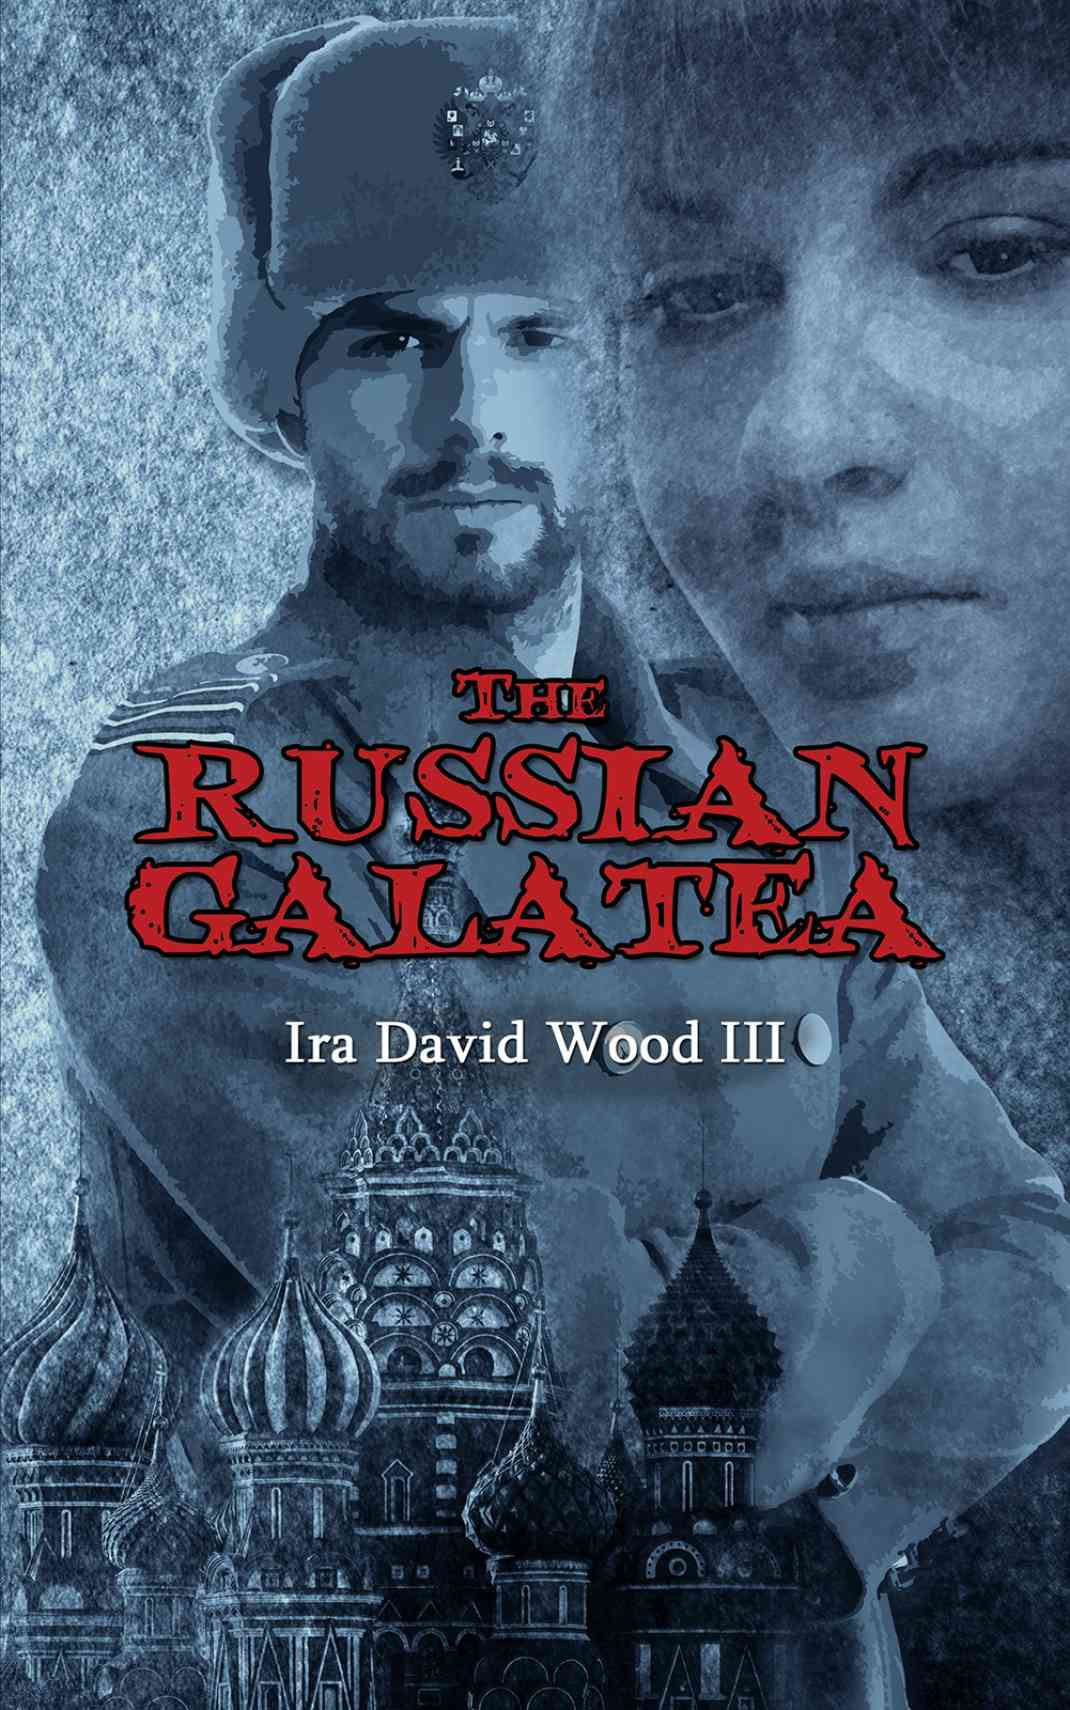 ,The Russian Galatea, by Ira David Wood III Received a Great Review